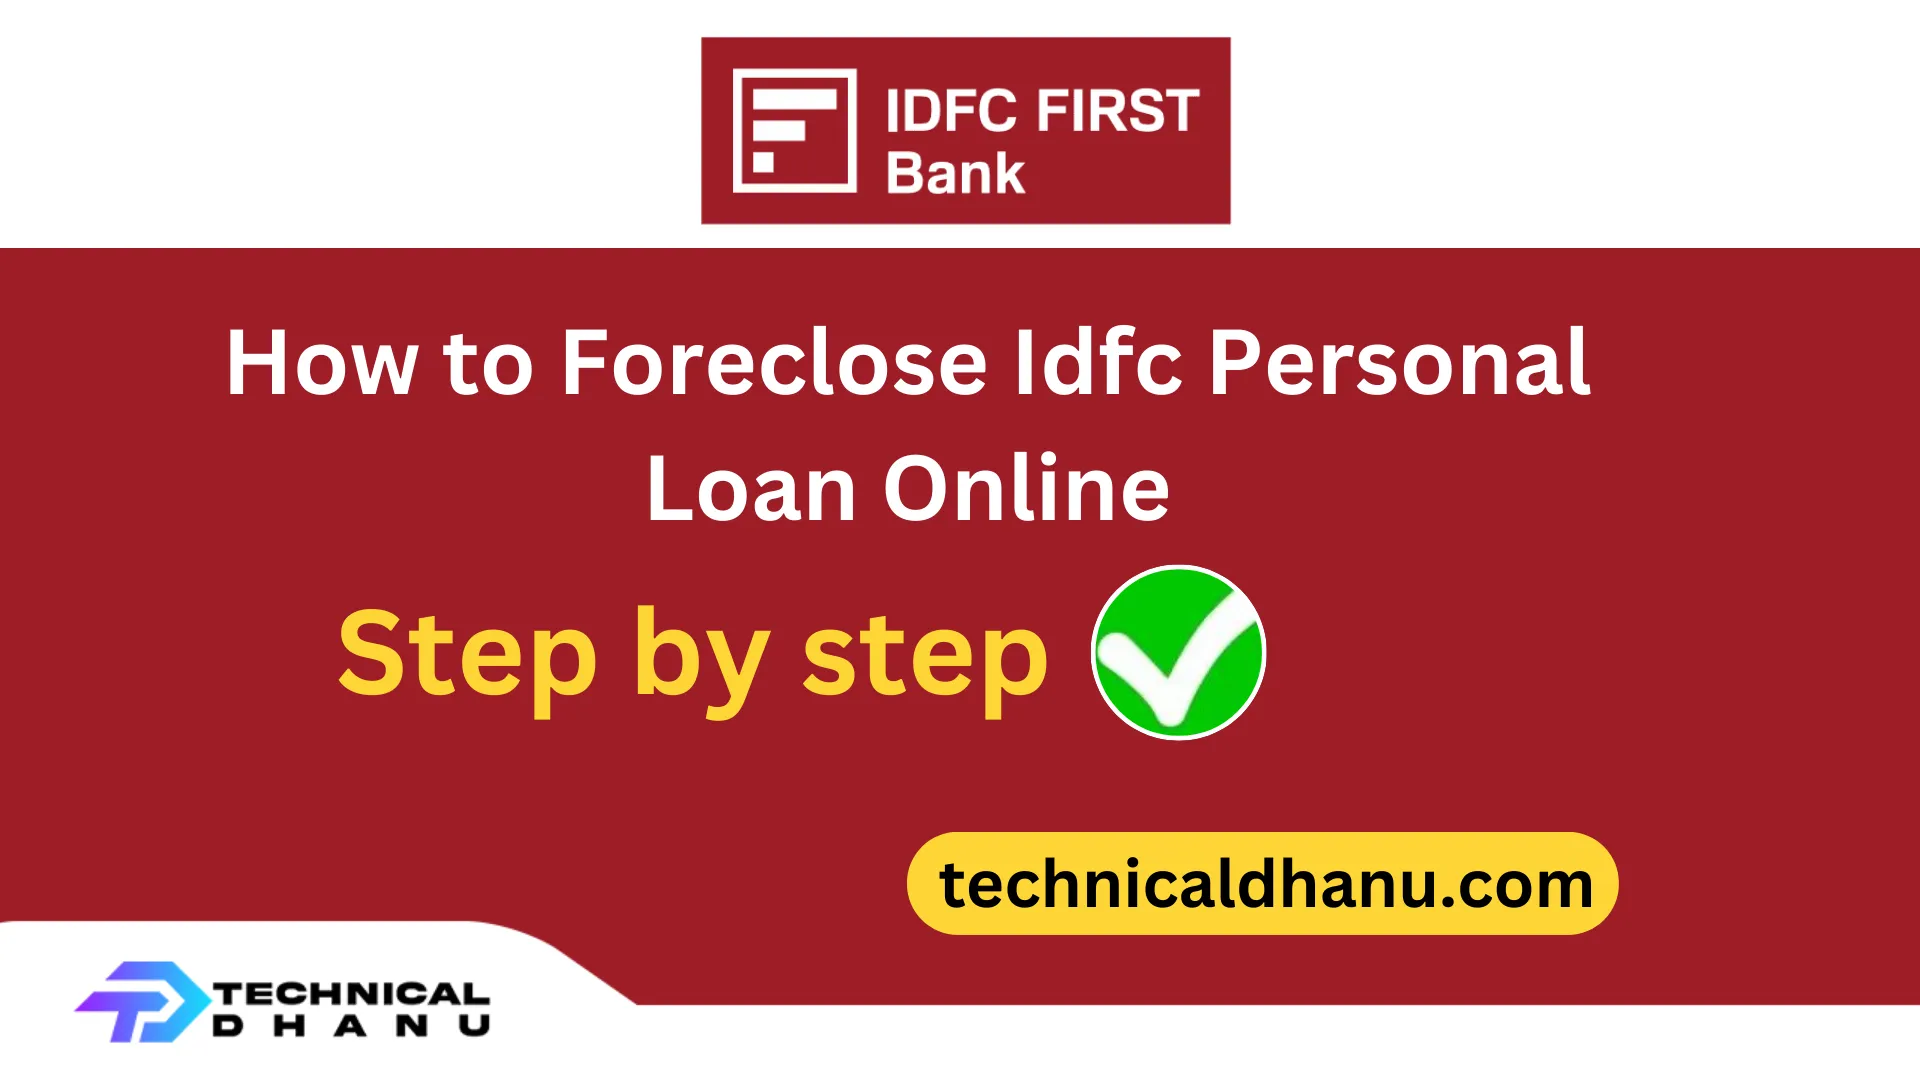 How to Foreclose IDFC Personal Loan Online